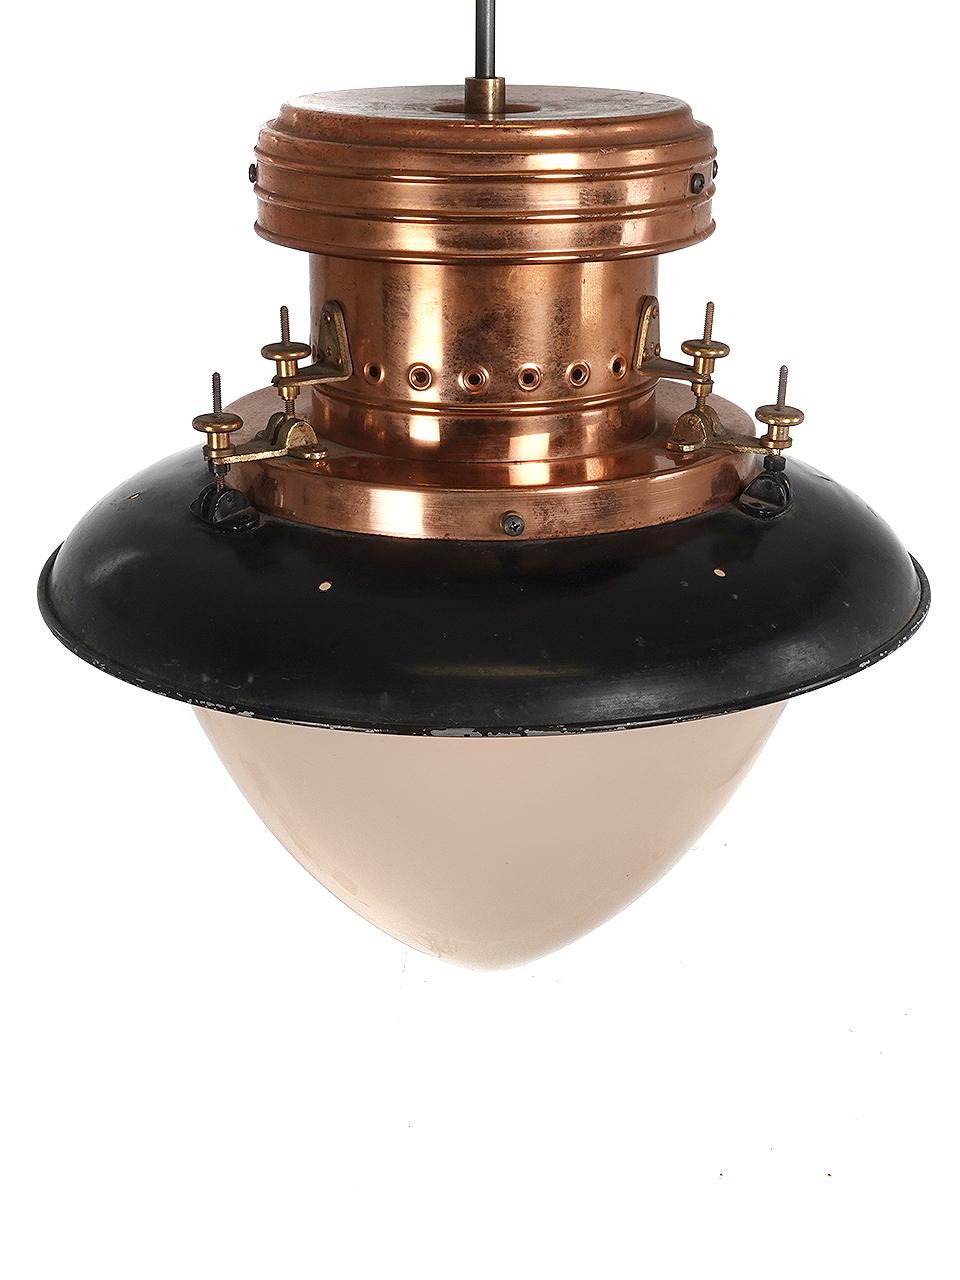 American Unique Gas Lamp in Polished Copper and Large Acorn Shade